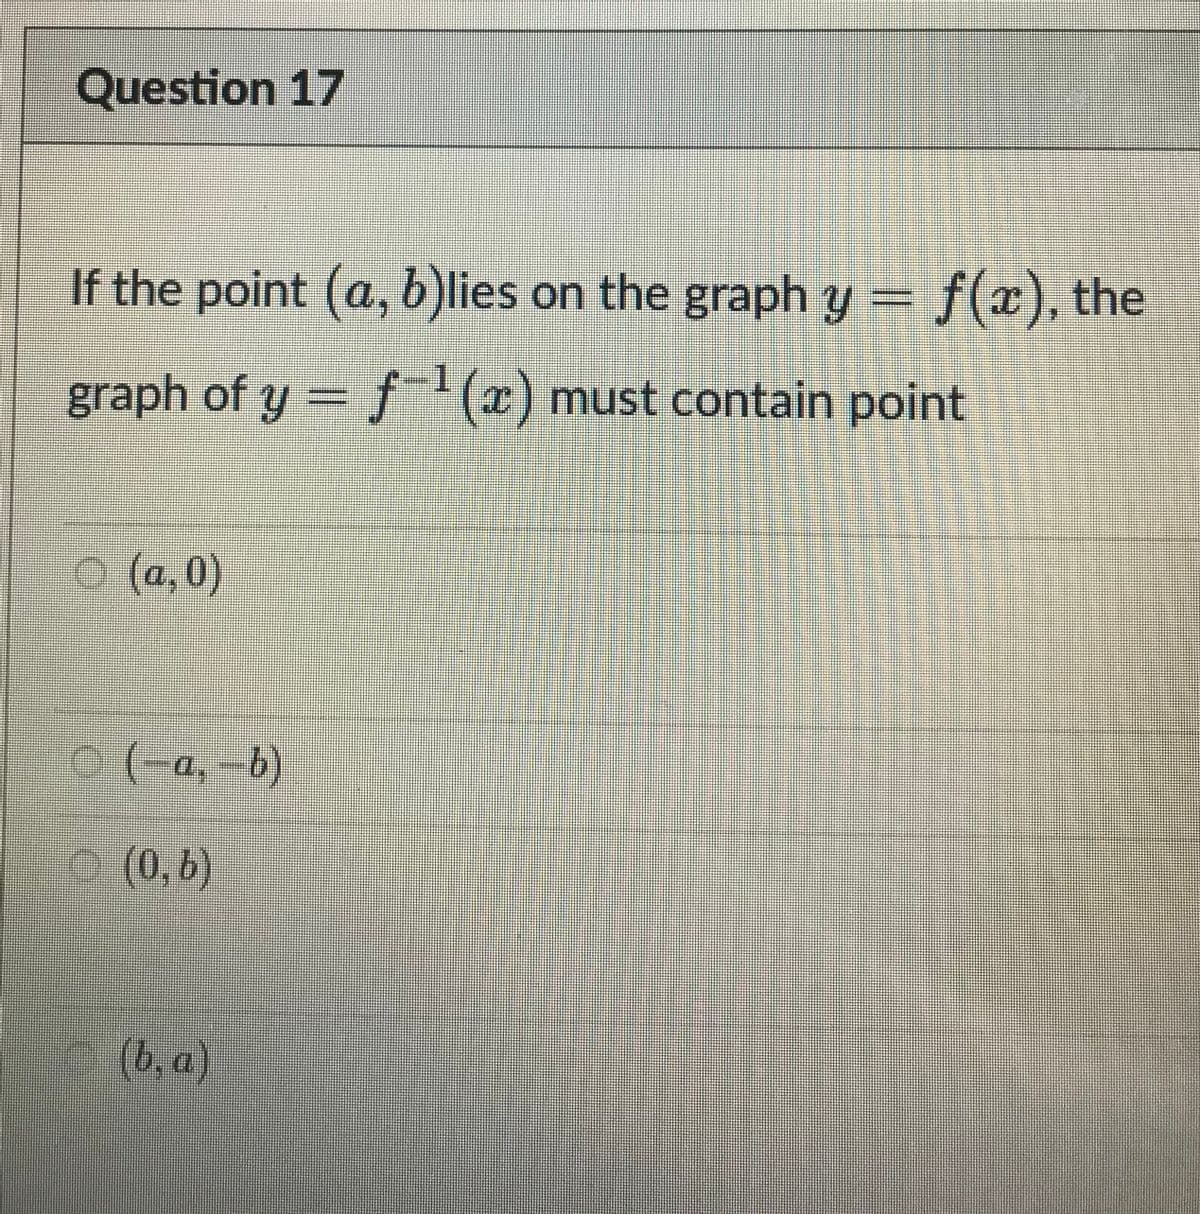 Question 17
If the point (a, b)lies on the graph y = f(x), the
graph of y = f-'(x) must contain point
O (a, 0)
(0, b)
(b, a)
